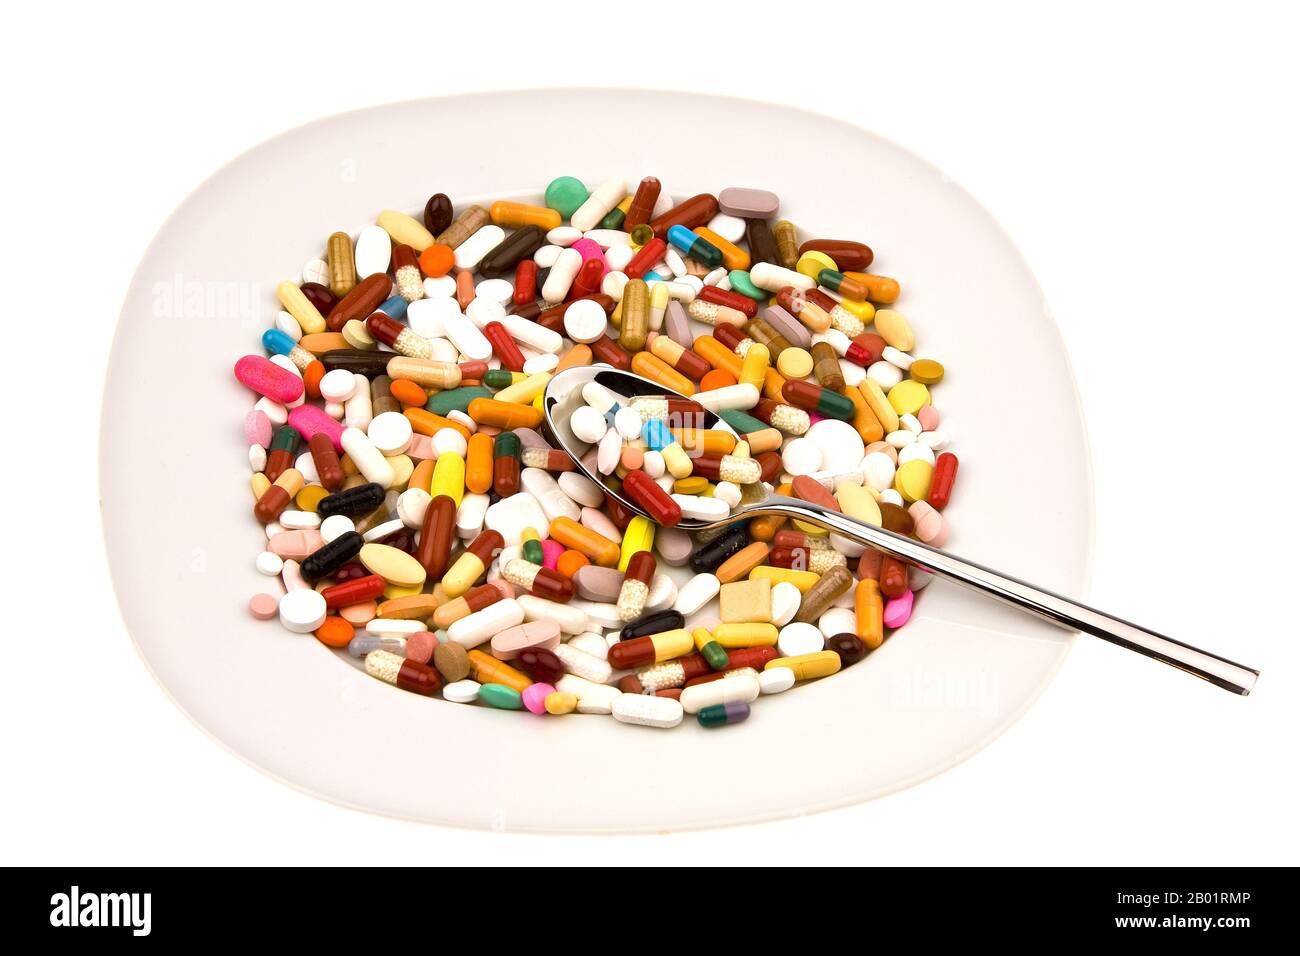 many colorful pills on a plate Stock Photo